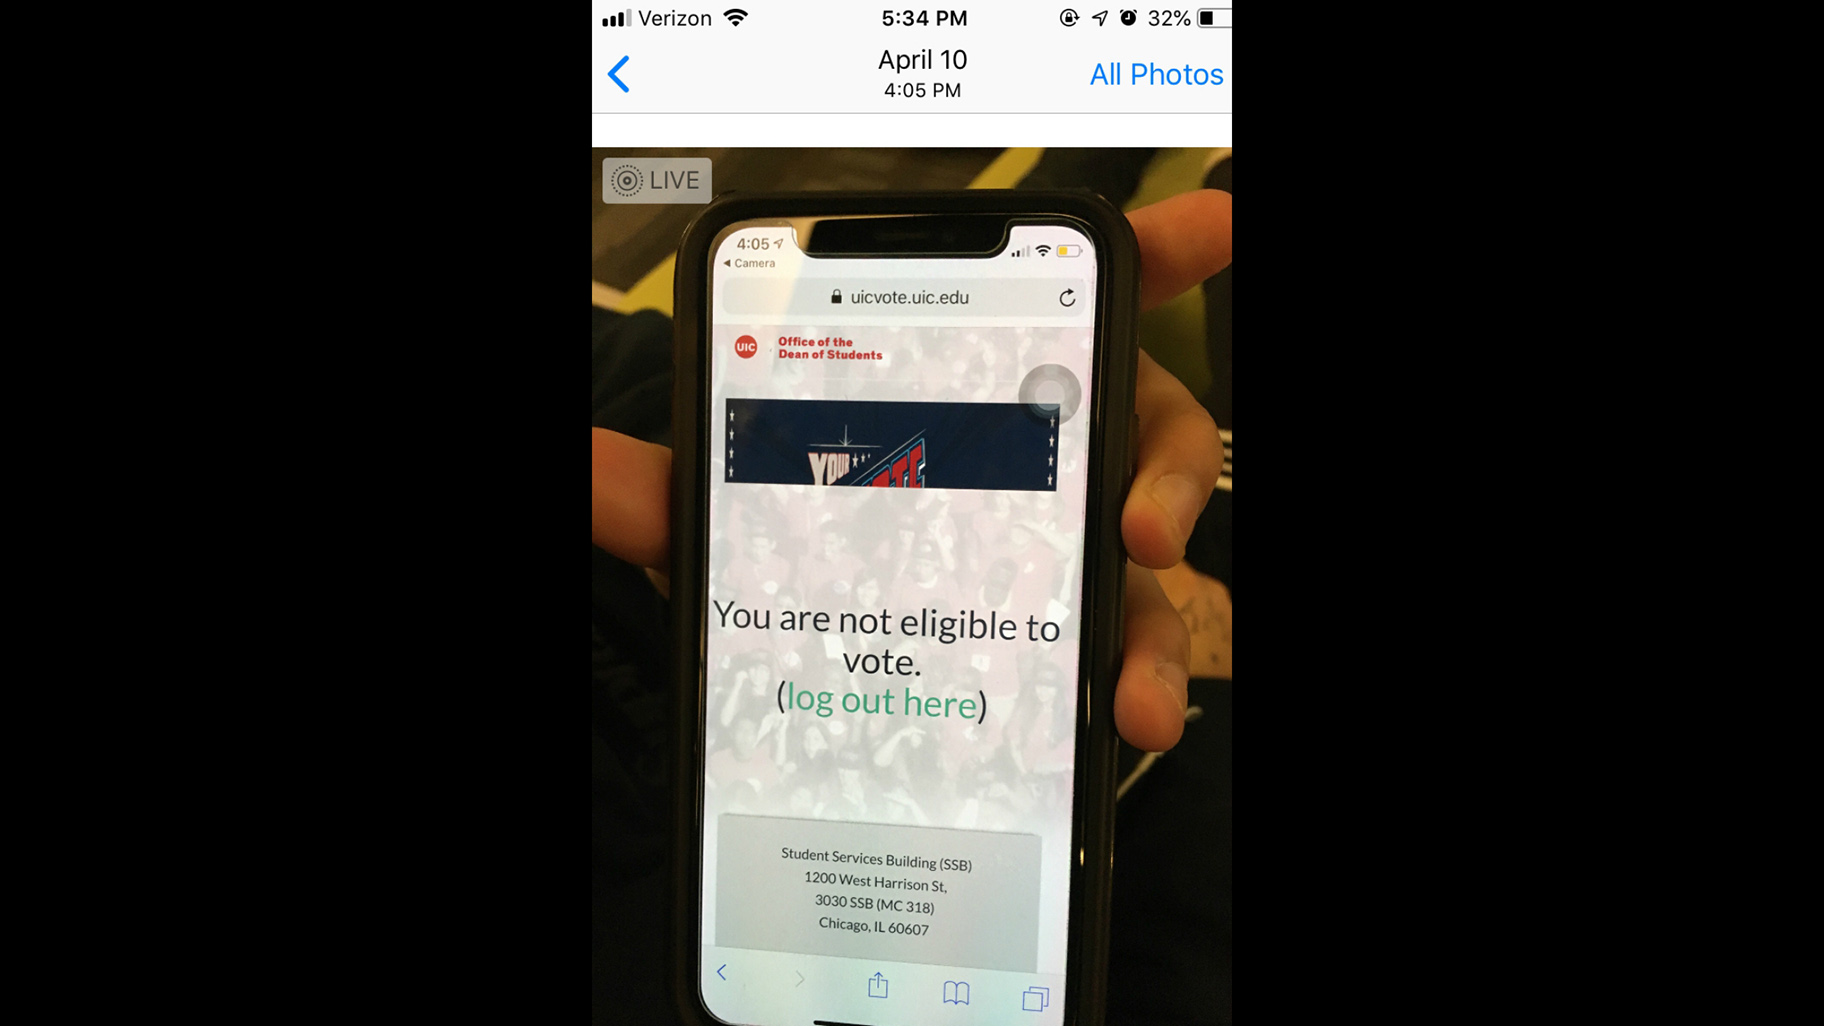 A student at the University of Illinois at Chicago shows the message they received during a student government election in April 2019. According to a new report, voting errors prevented at least 450 students from participating fully in the election. (Courtesy UIC Student Justice Coalition)